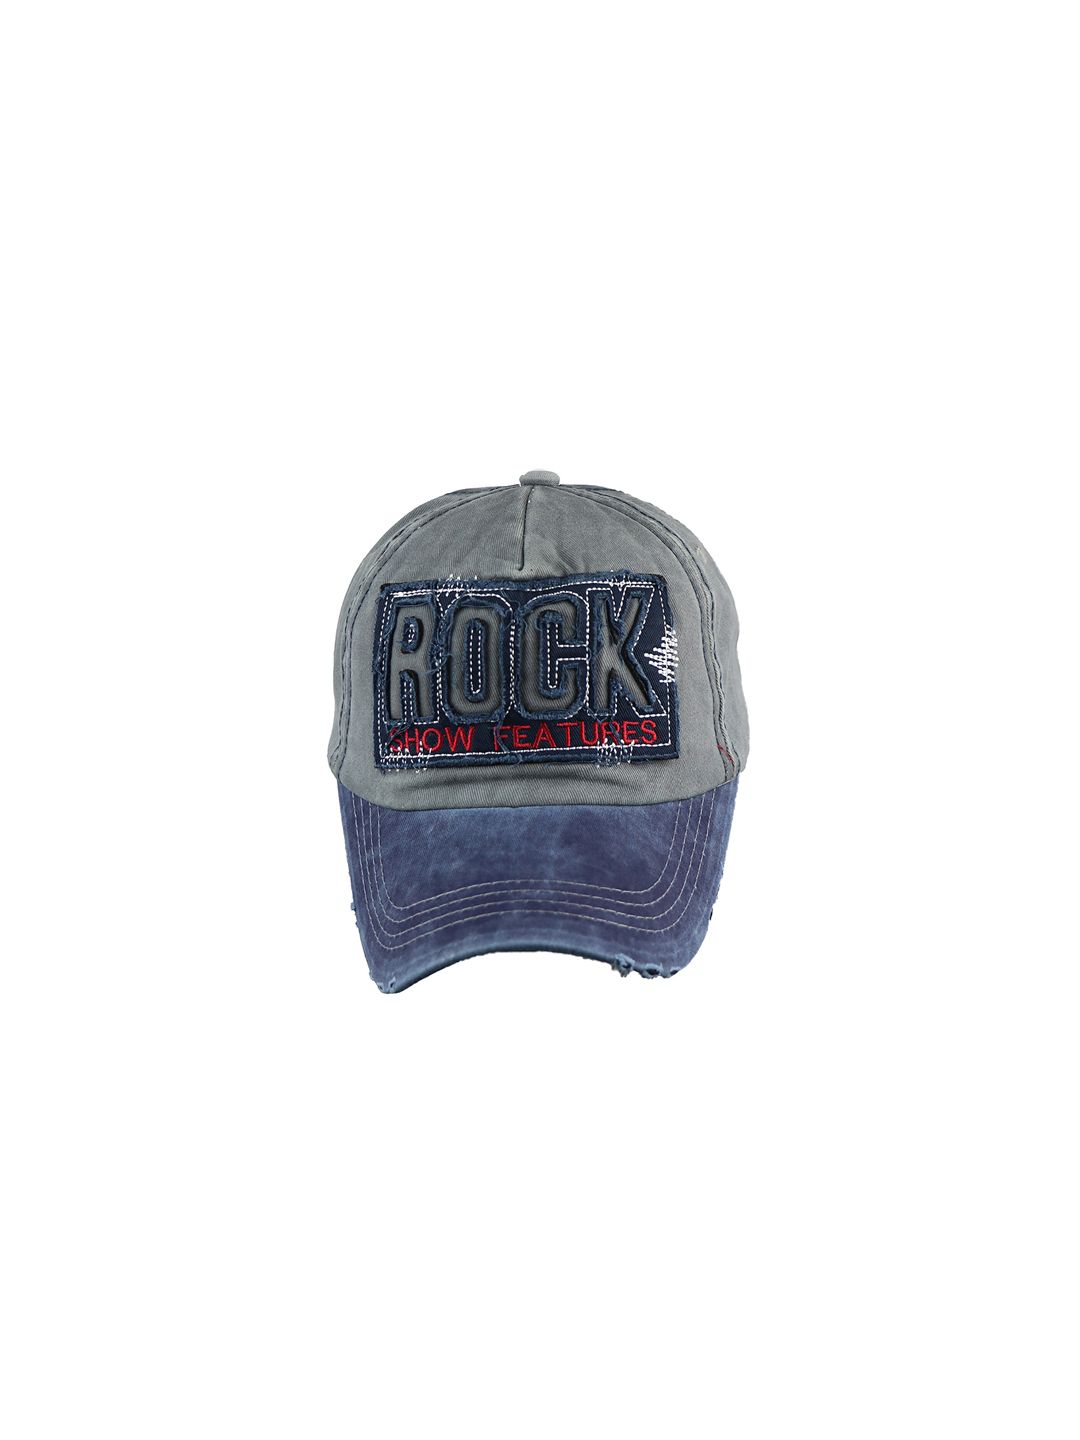 iSWEVEN Unisex Grey & Blue Embroidered Baseball Cap Price in India